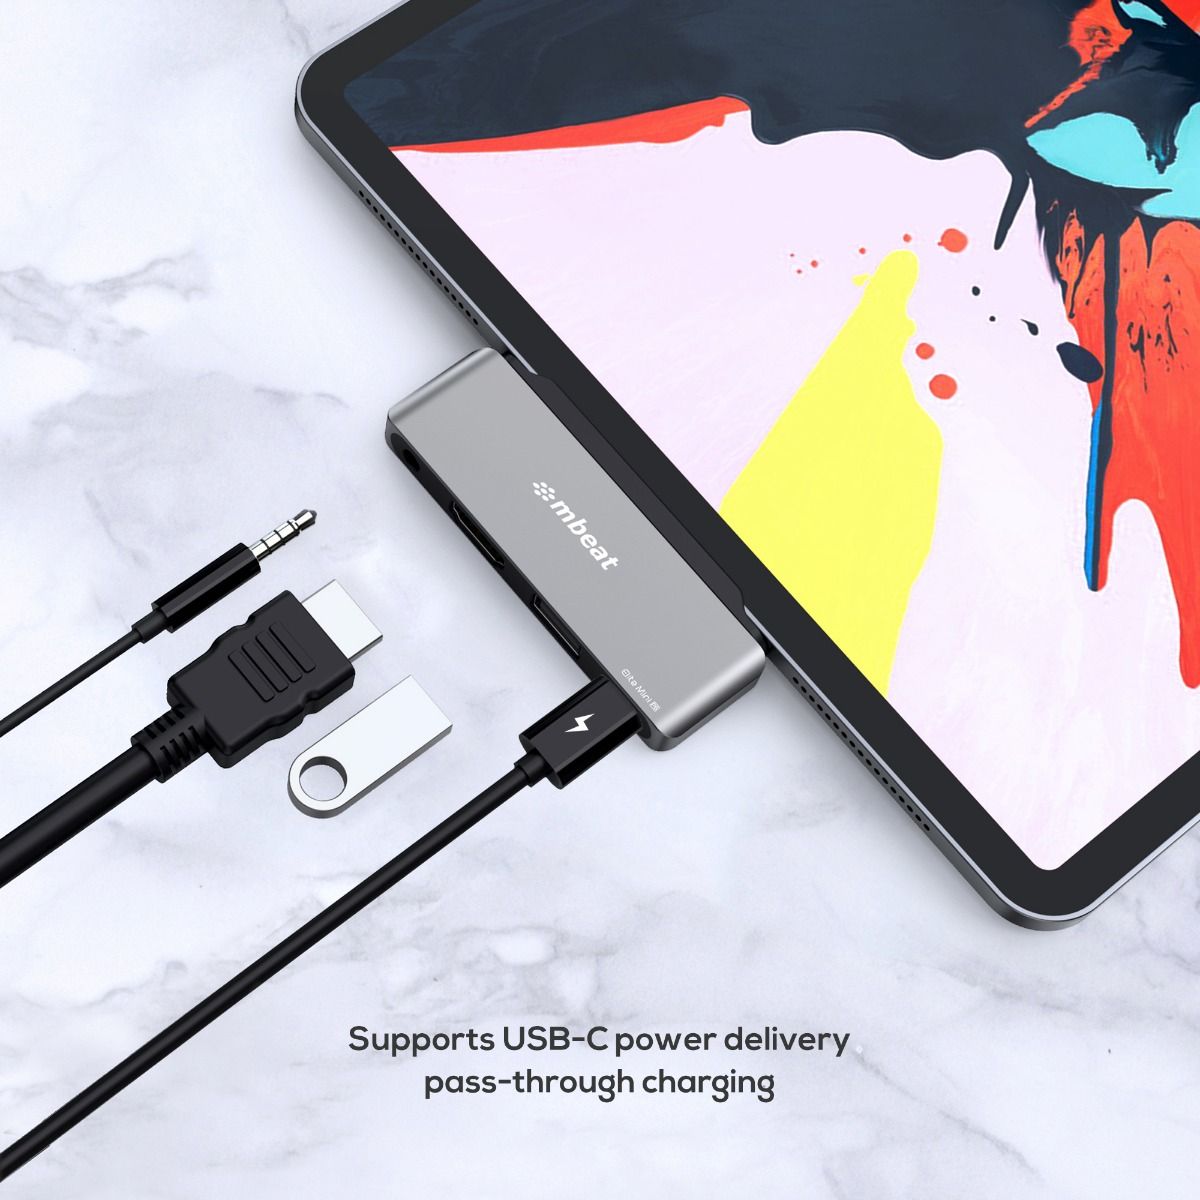 A large marketing image providing additional information about the product mBeat Elite Mini 4-in-1 USB-C Mobile Hub For IPad Pro - Additional alt info not provided